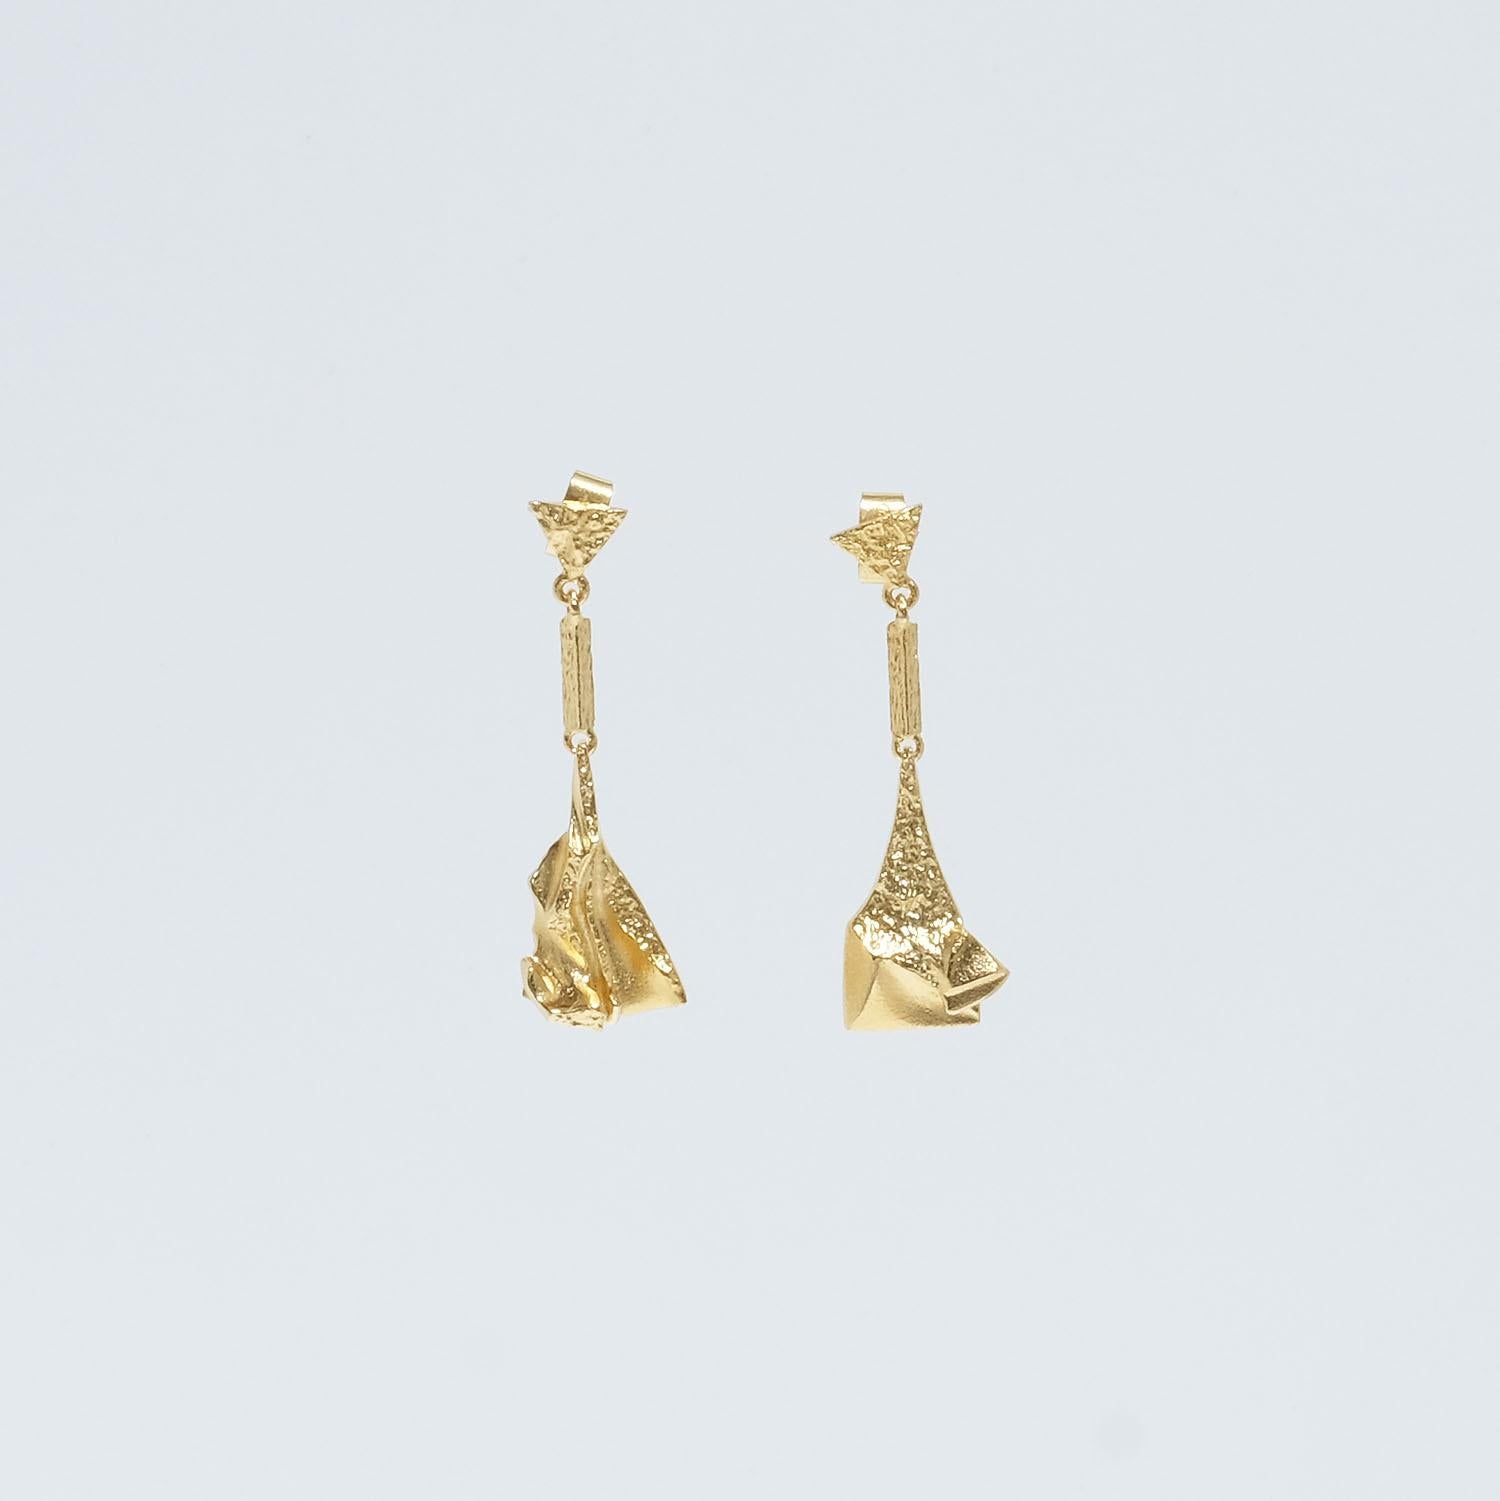 These 18 karat gold earrings are called Scarlett. They show upon typical Björn Weckström design characteristics with the shimmering matte gold, the broken and uneven surfaces in combination with the simple, sculptural qualities. To keep the earrings